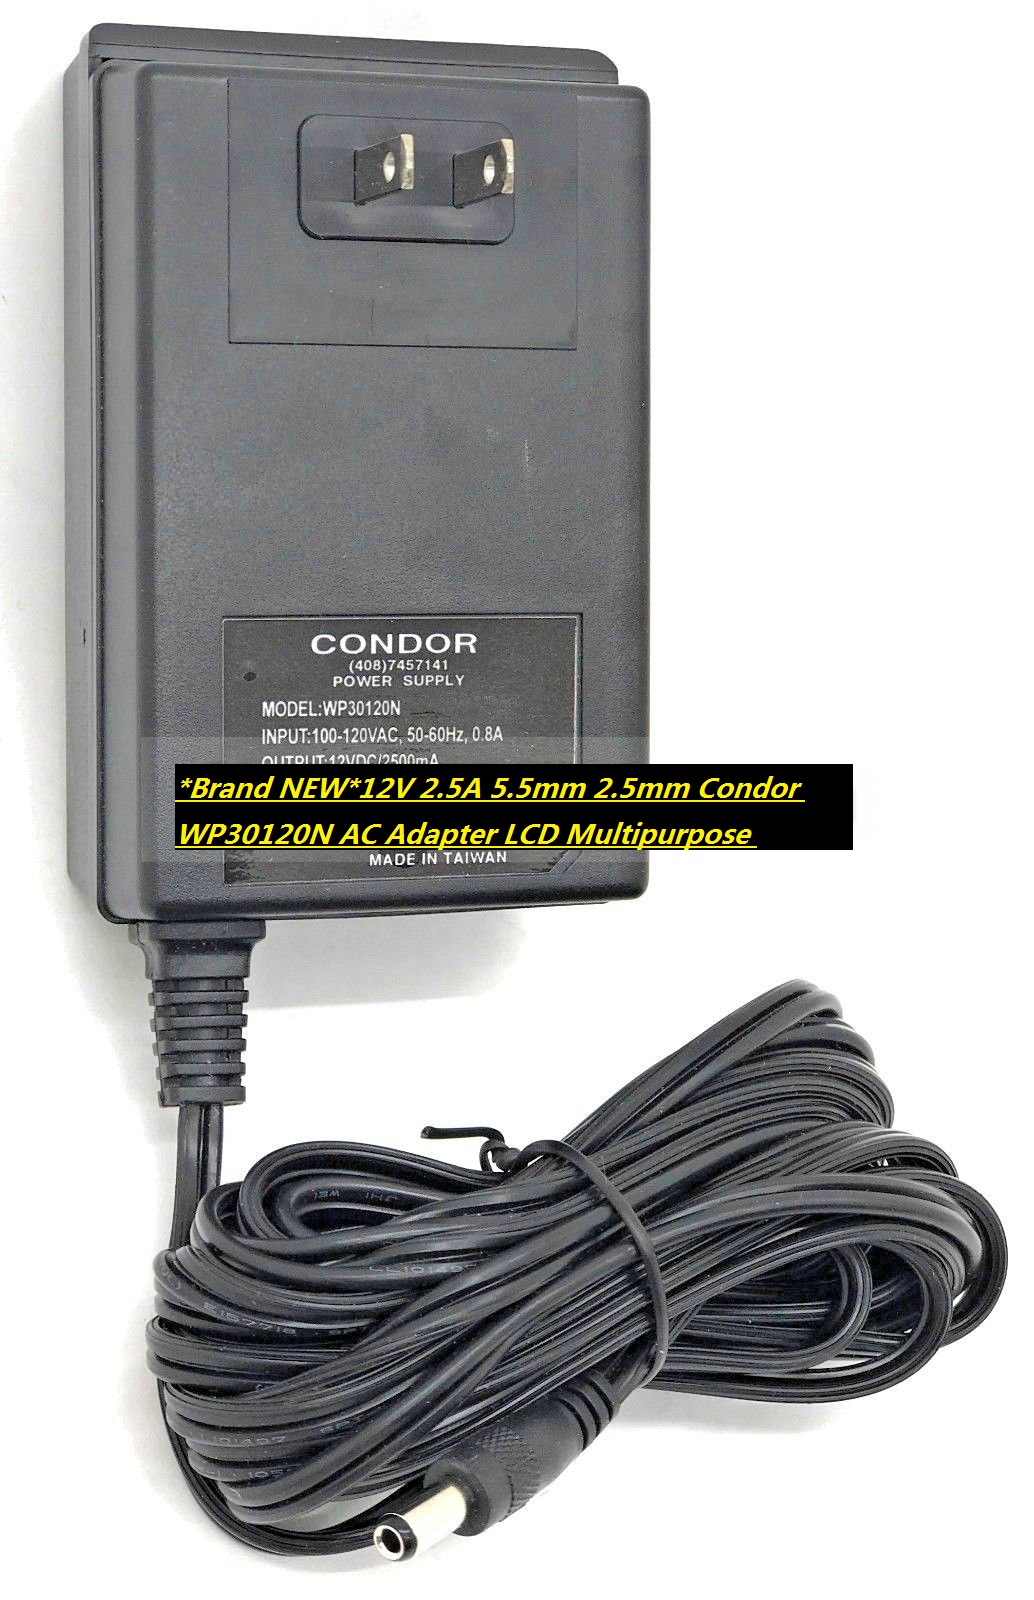 *Brand NEW*12V 2.5A 5.5mm 2.5mm Condor WP30120N AC Adapter LCD Multipurpose - Click Image to Close